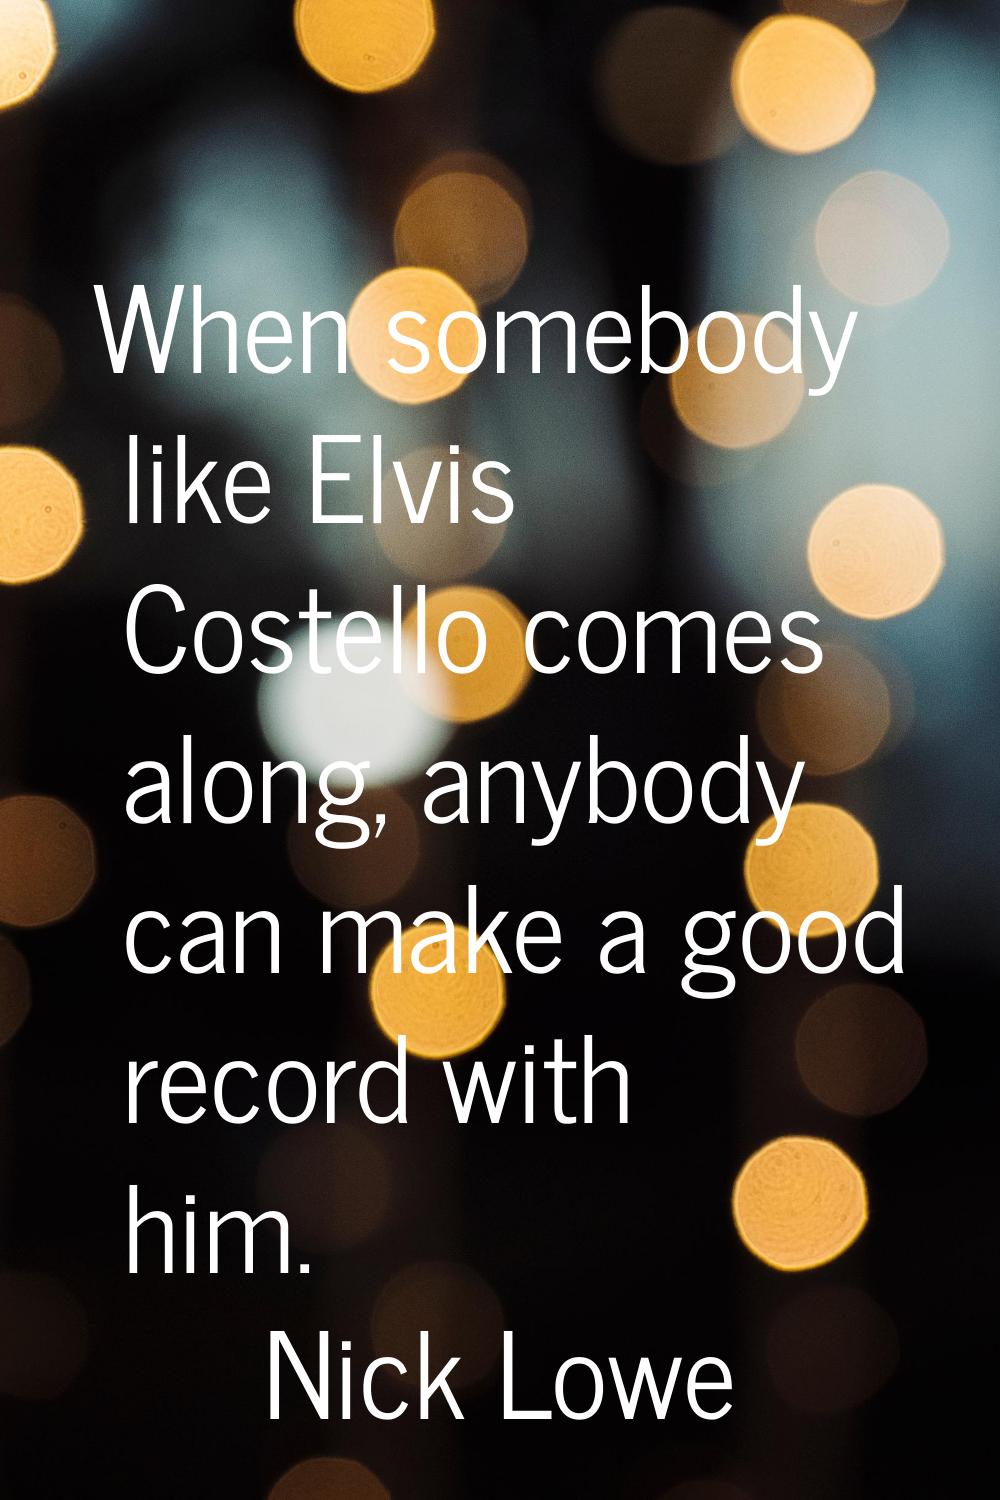 When somebody like Elvis Costello comes along, anybody can make a good record with him.